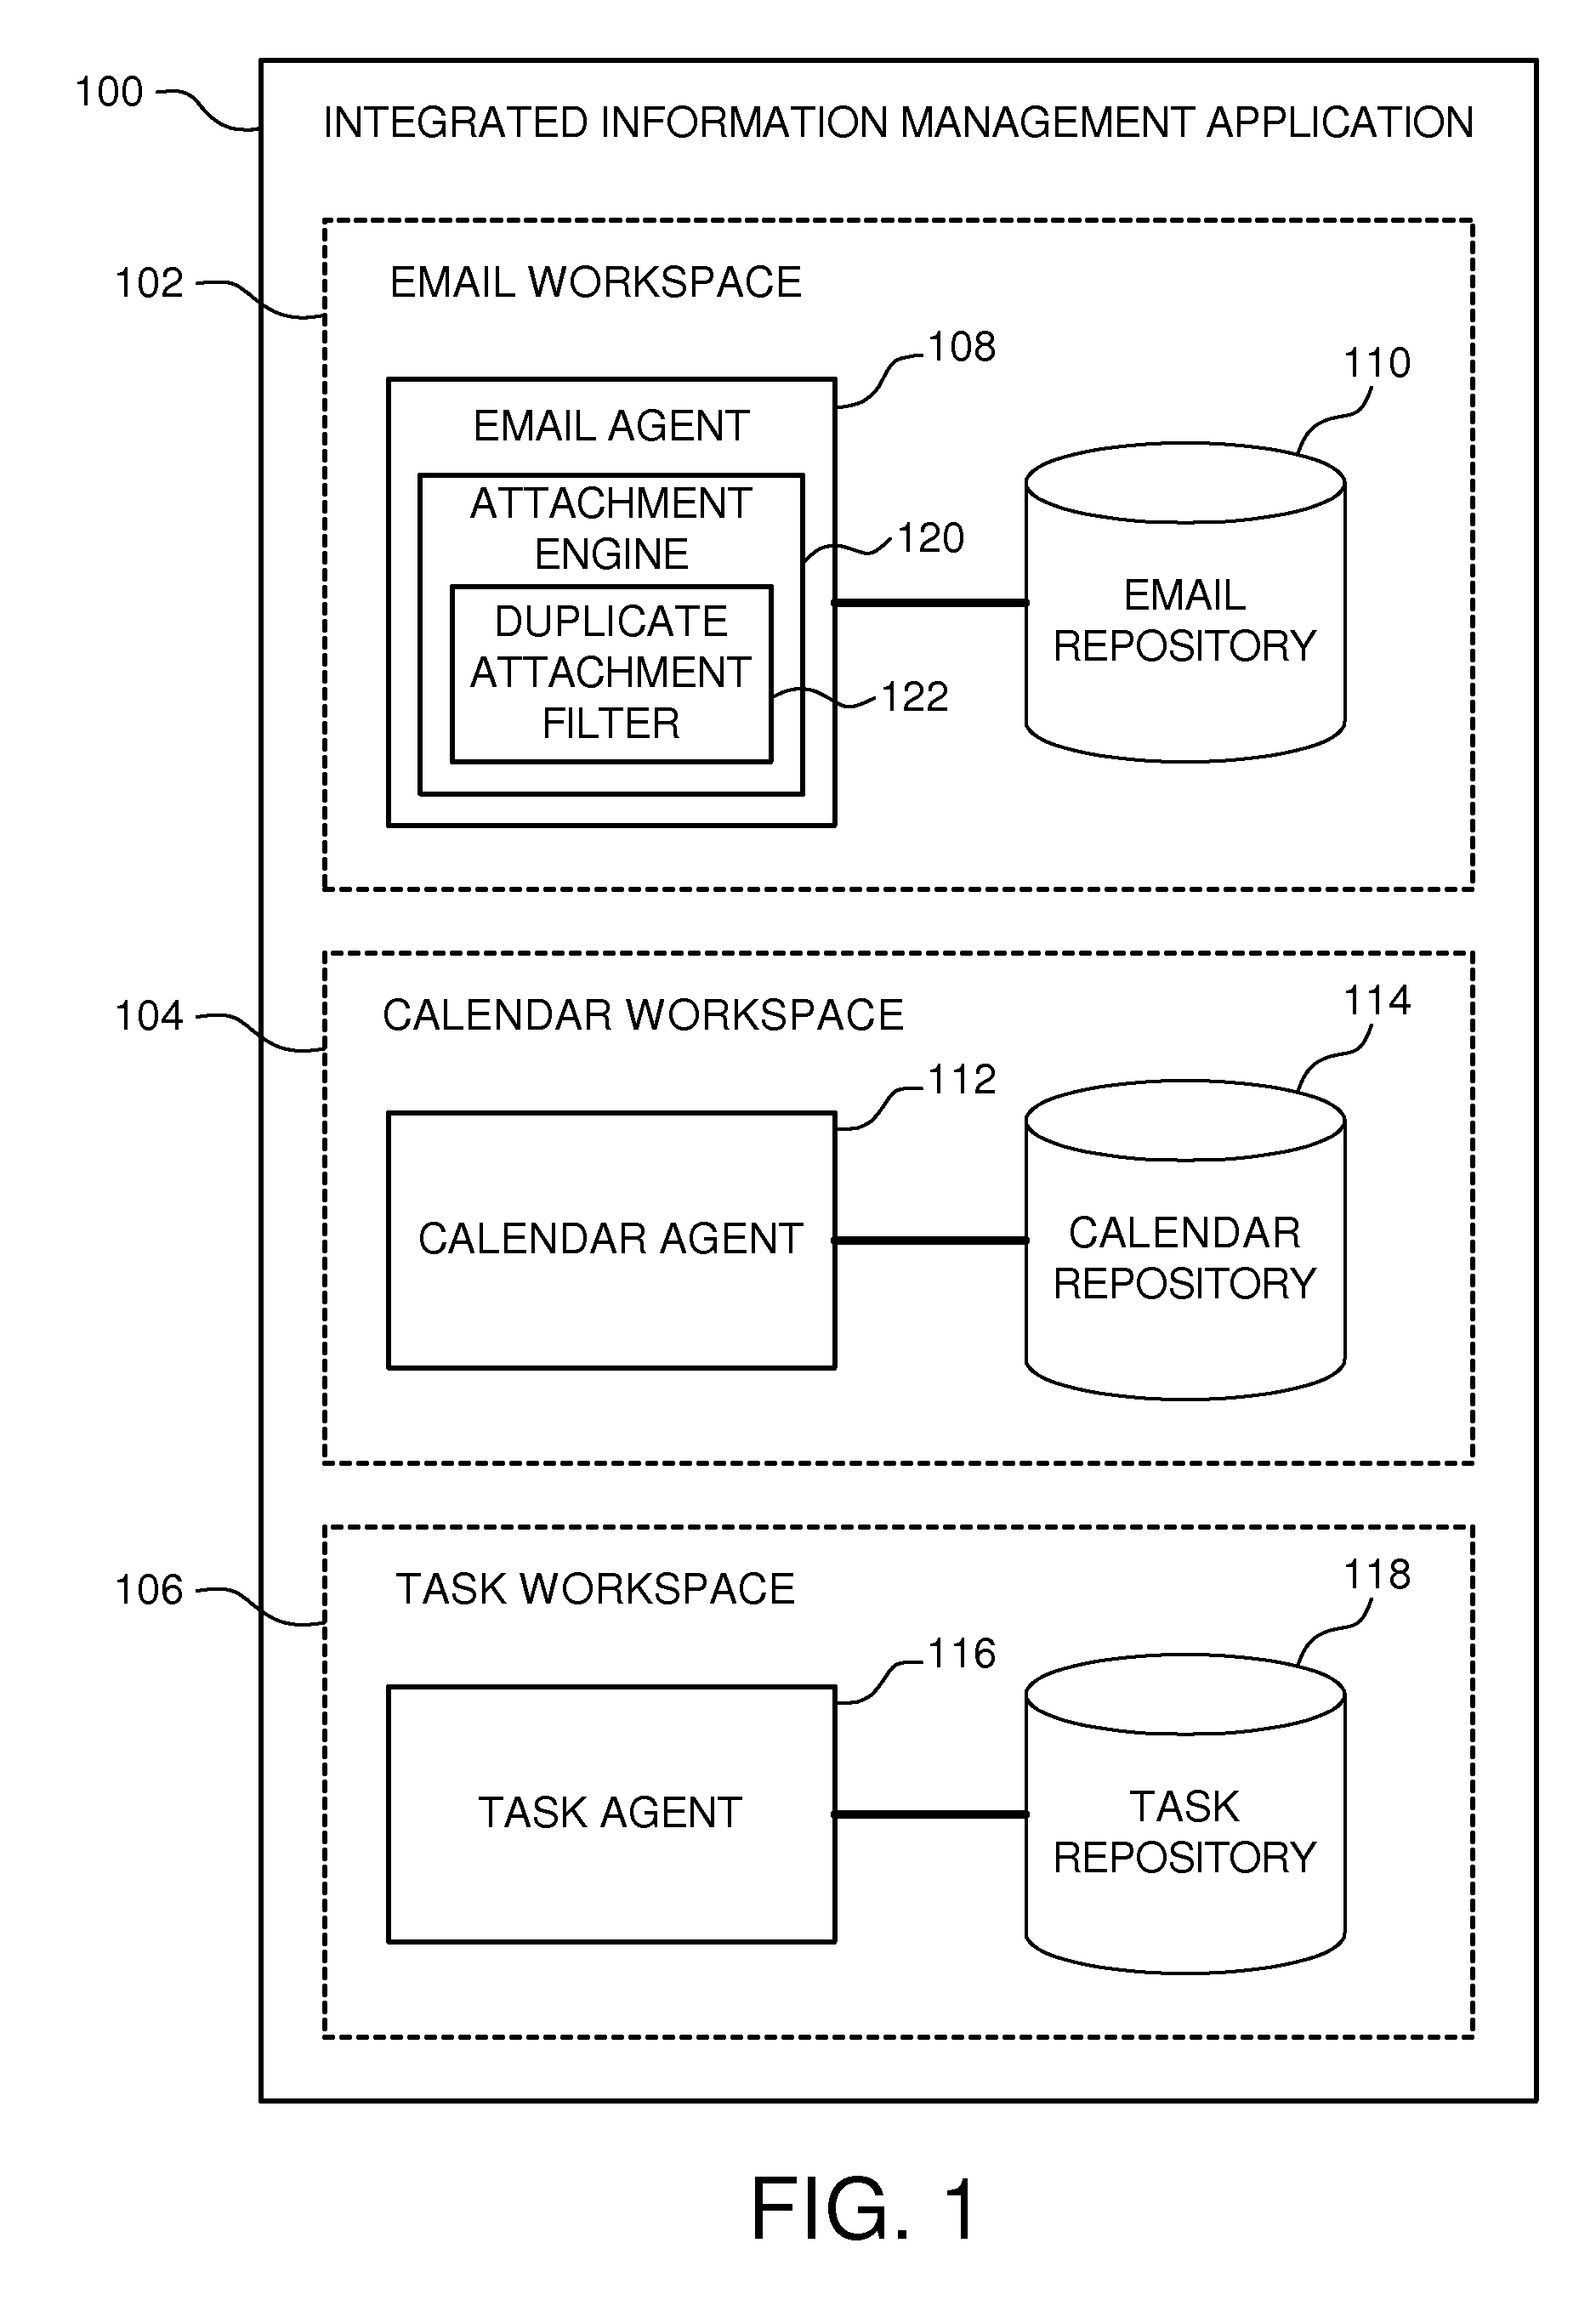 System and method for sorting attachments in an integrated information management application